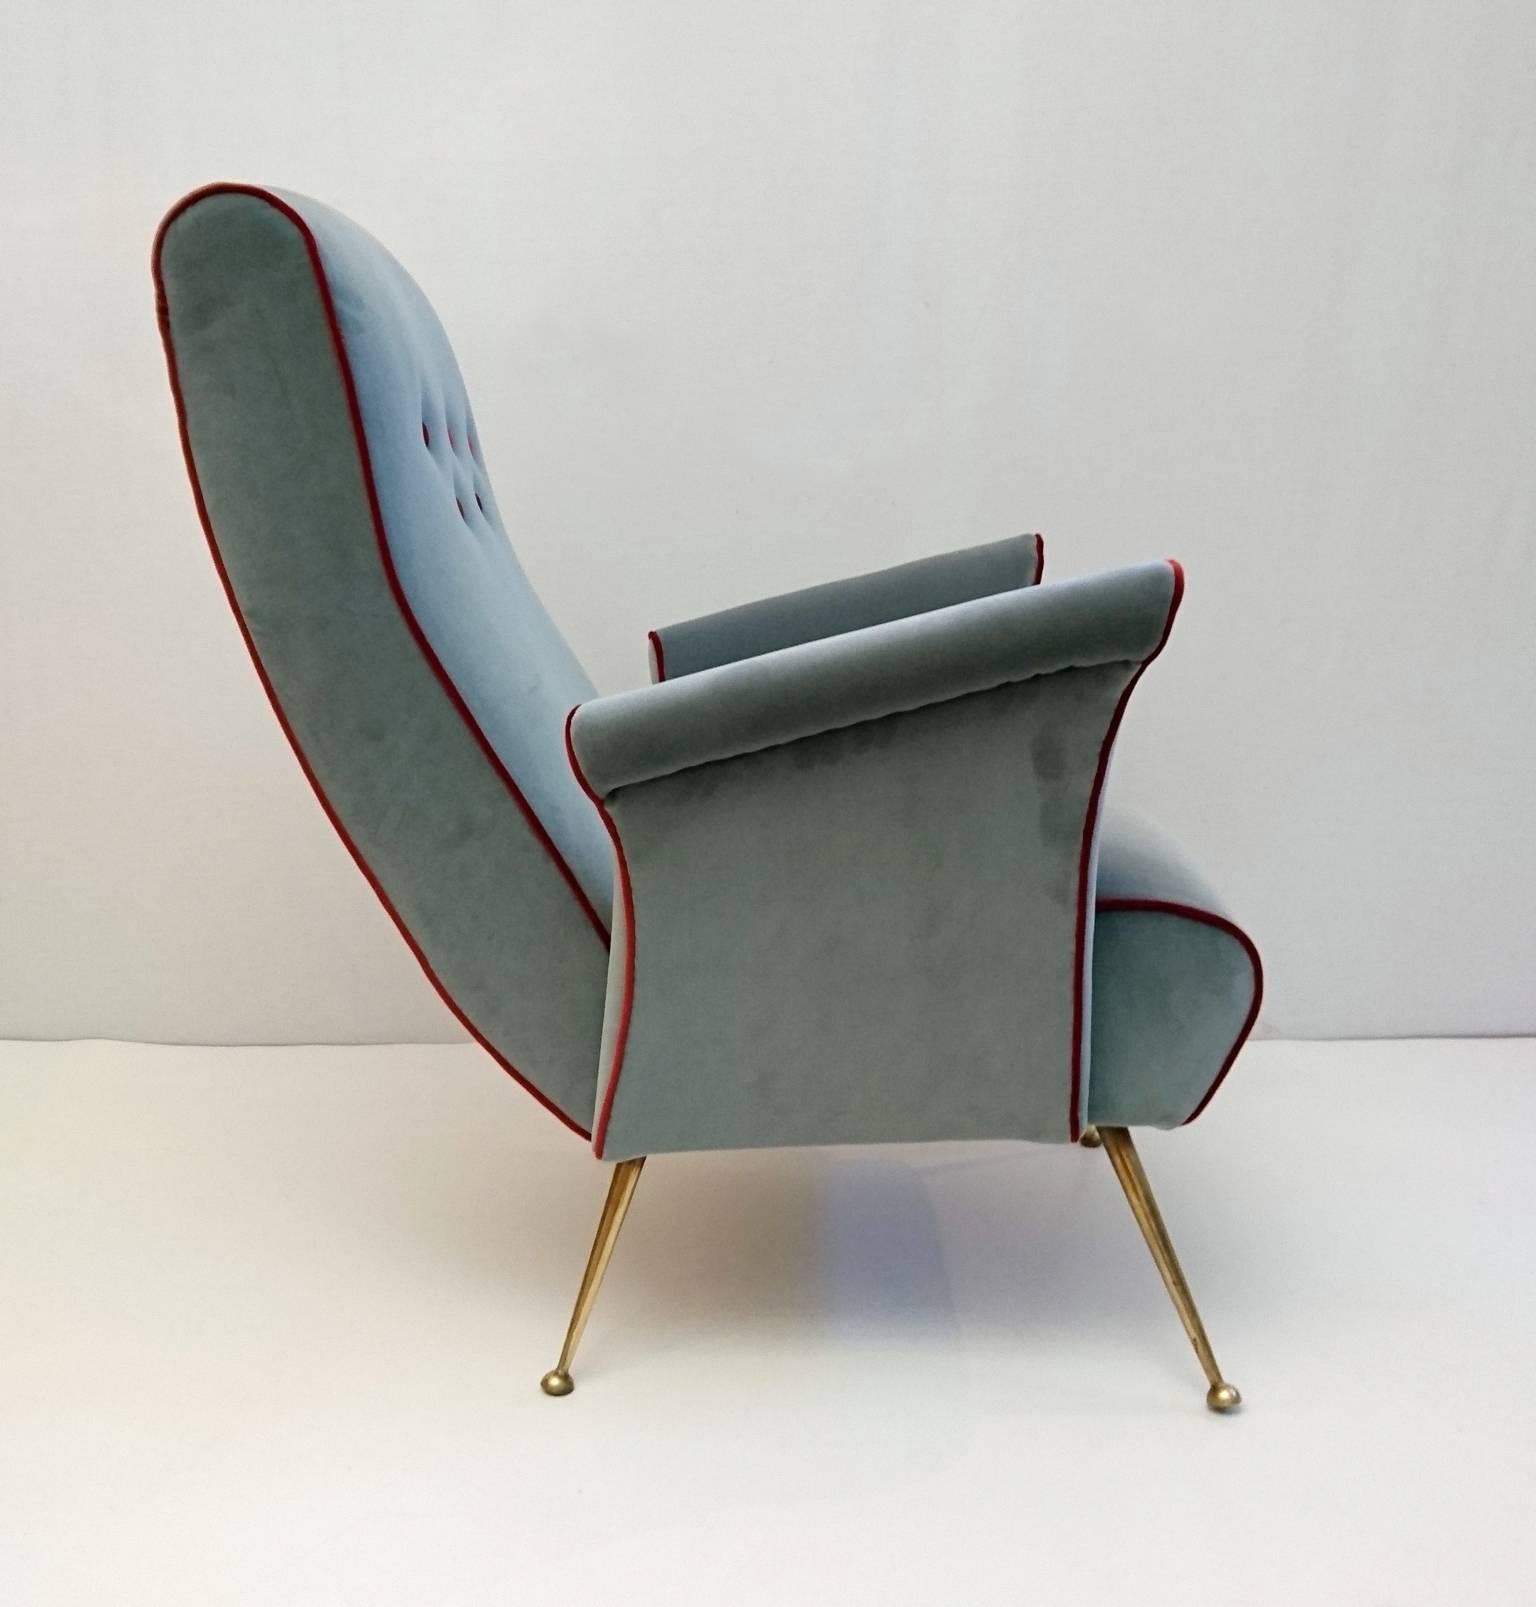 This armchair with brass spider legs has recently been completely professionally reupholstered in a soft gray velvet with crimson red piping and buttons. Comfortable as well as elegant.